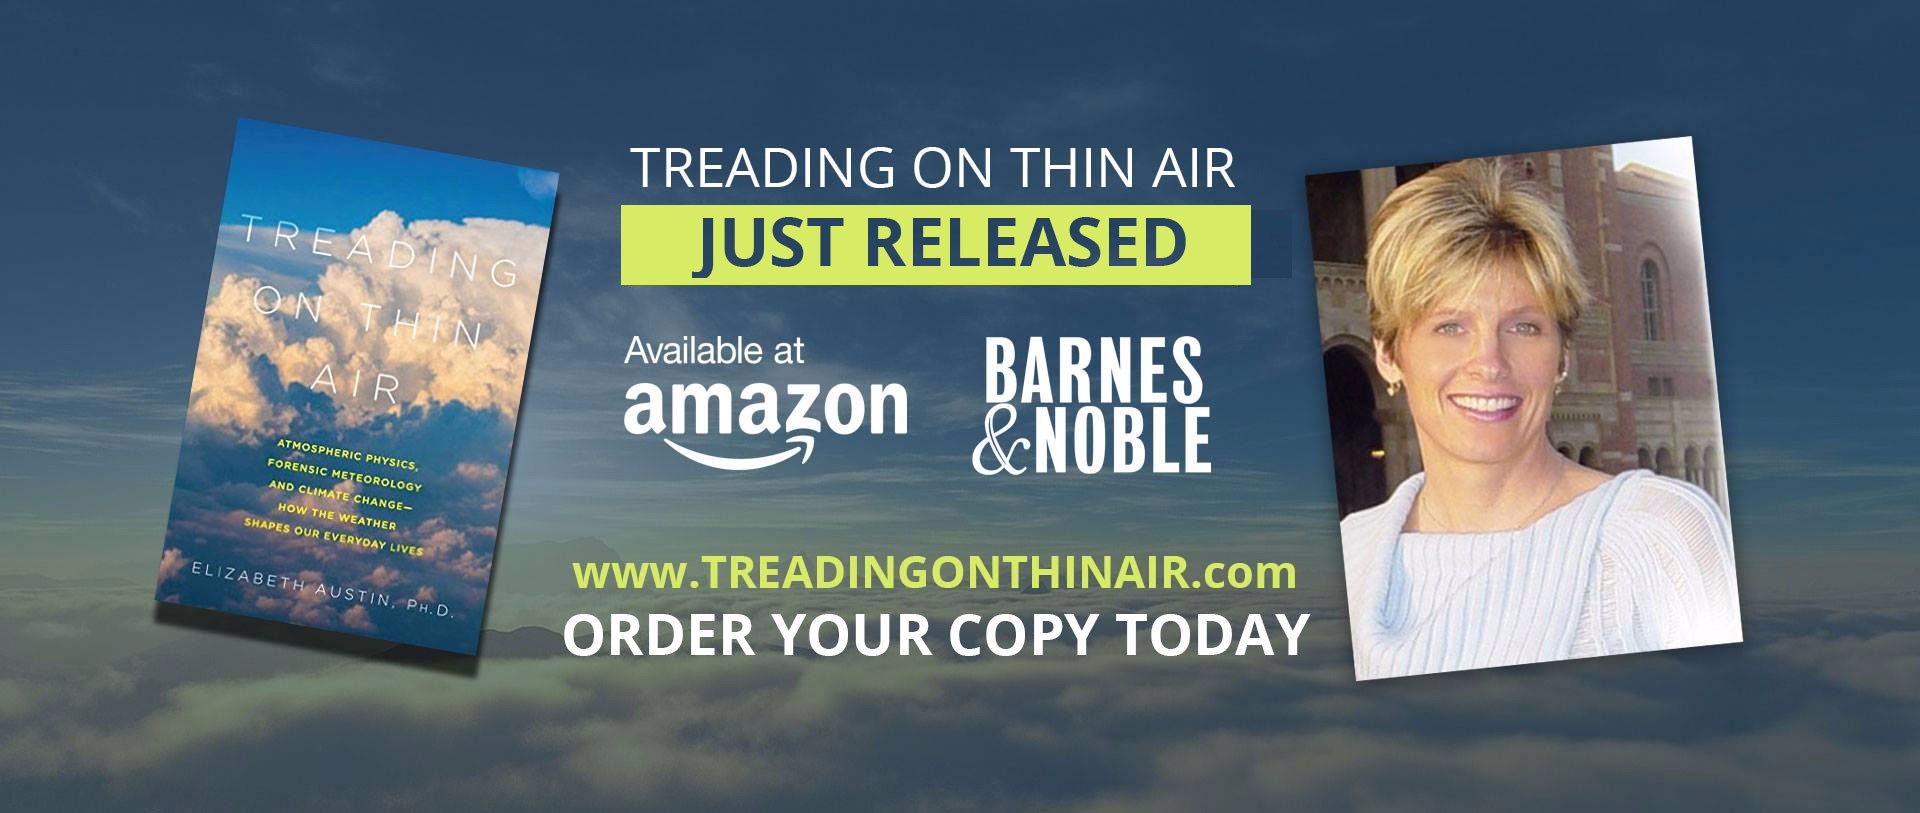 TREADING ON THIN AIR HAS OFFICIALLY RELEASED